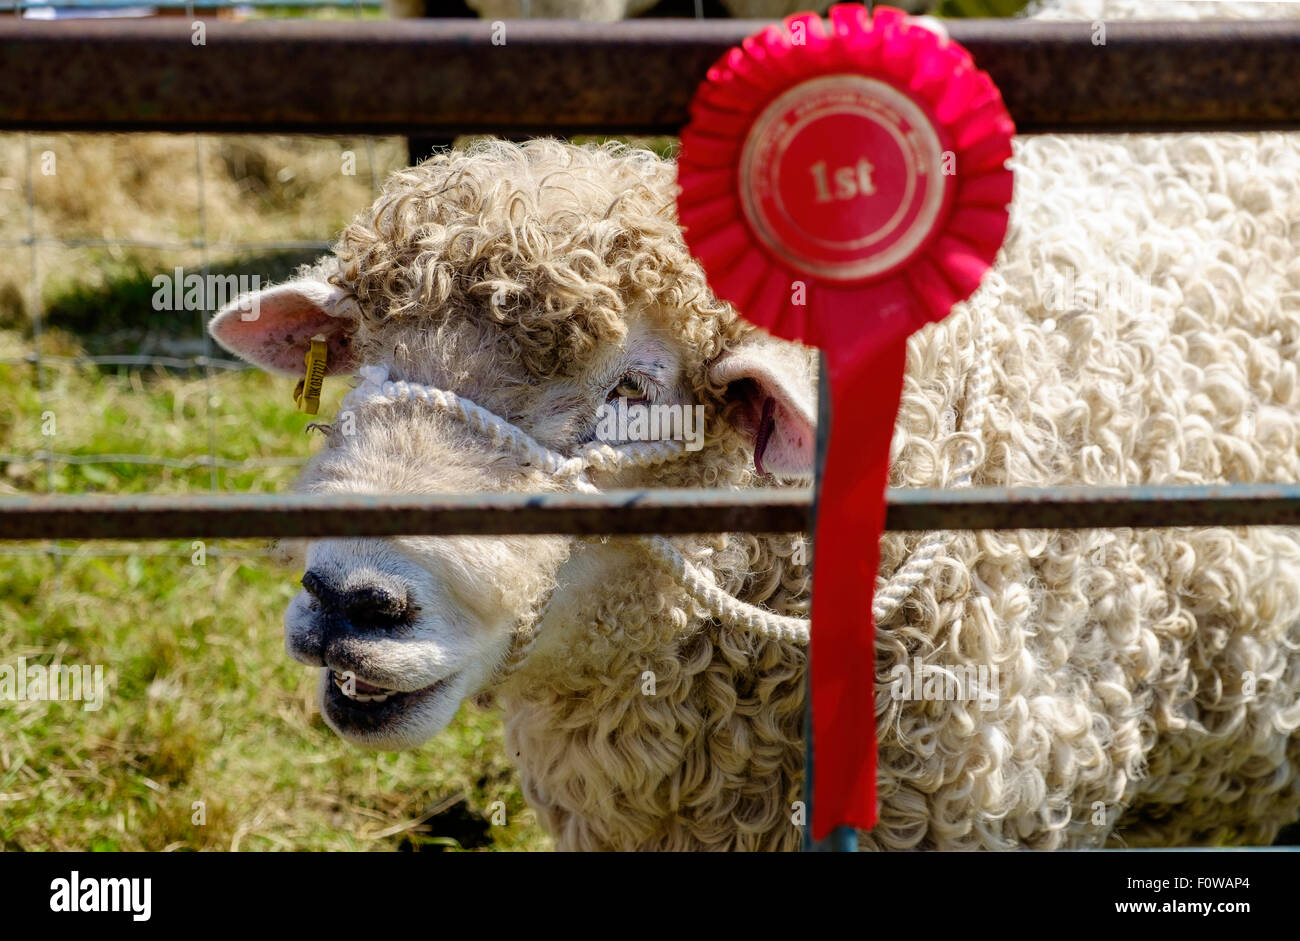 Curly fleeced sheep in pen at ChepstowAgricultural Show,Monmouthshire Wales .1st prize winner red rosette pinned to bar of pen. Stock Photo